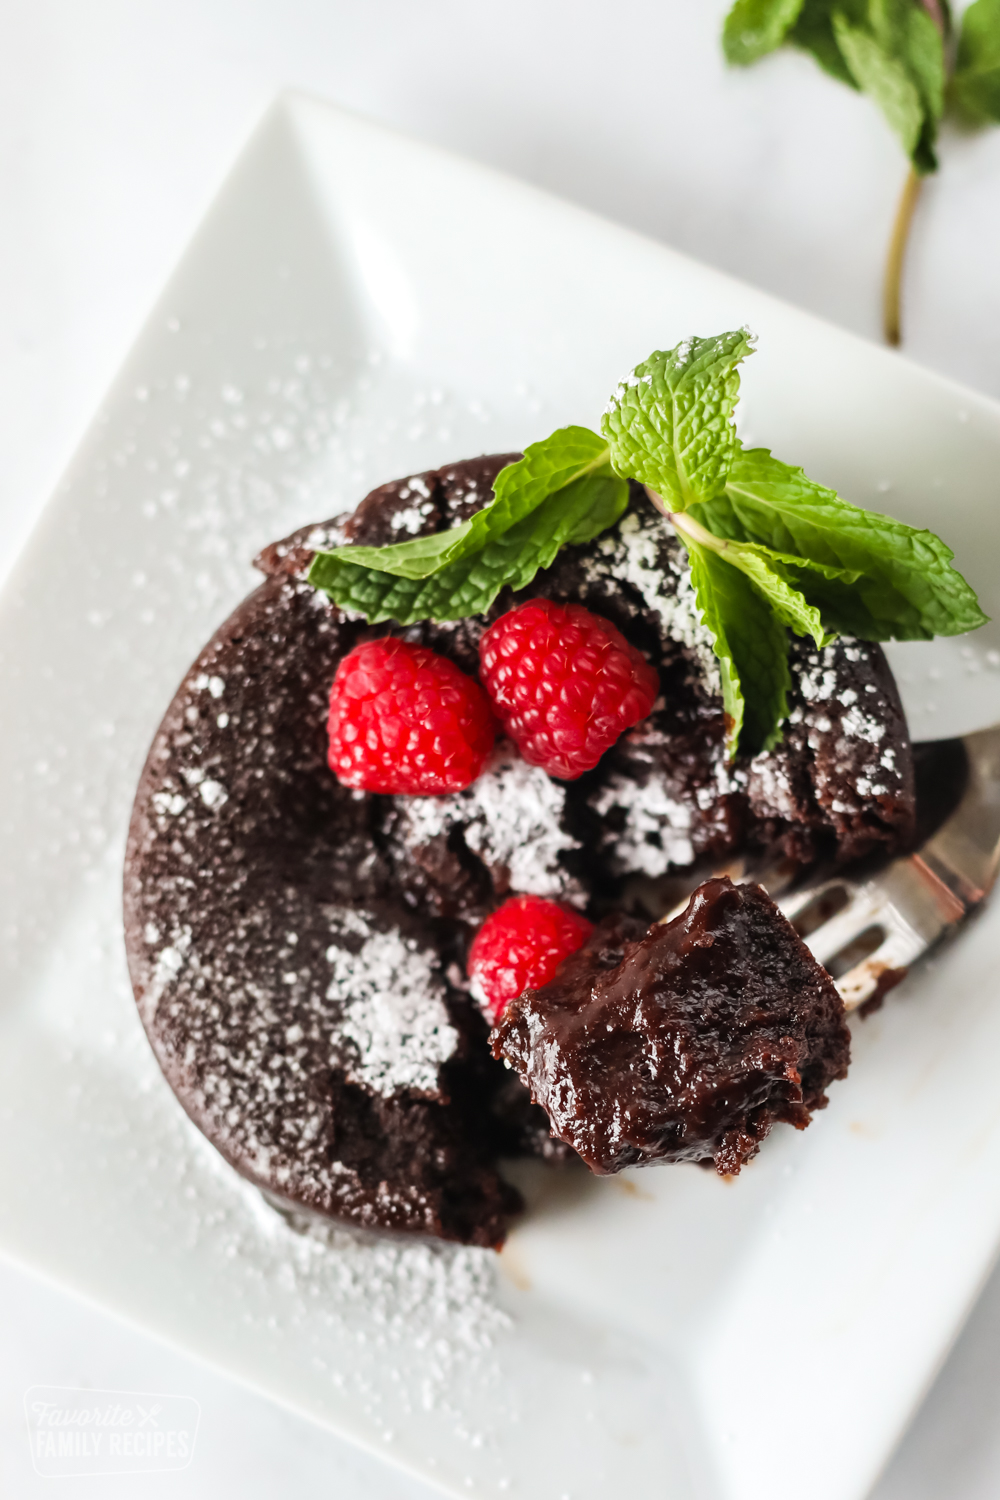 Lava cake on a plate with raspberries and mint garnish